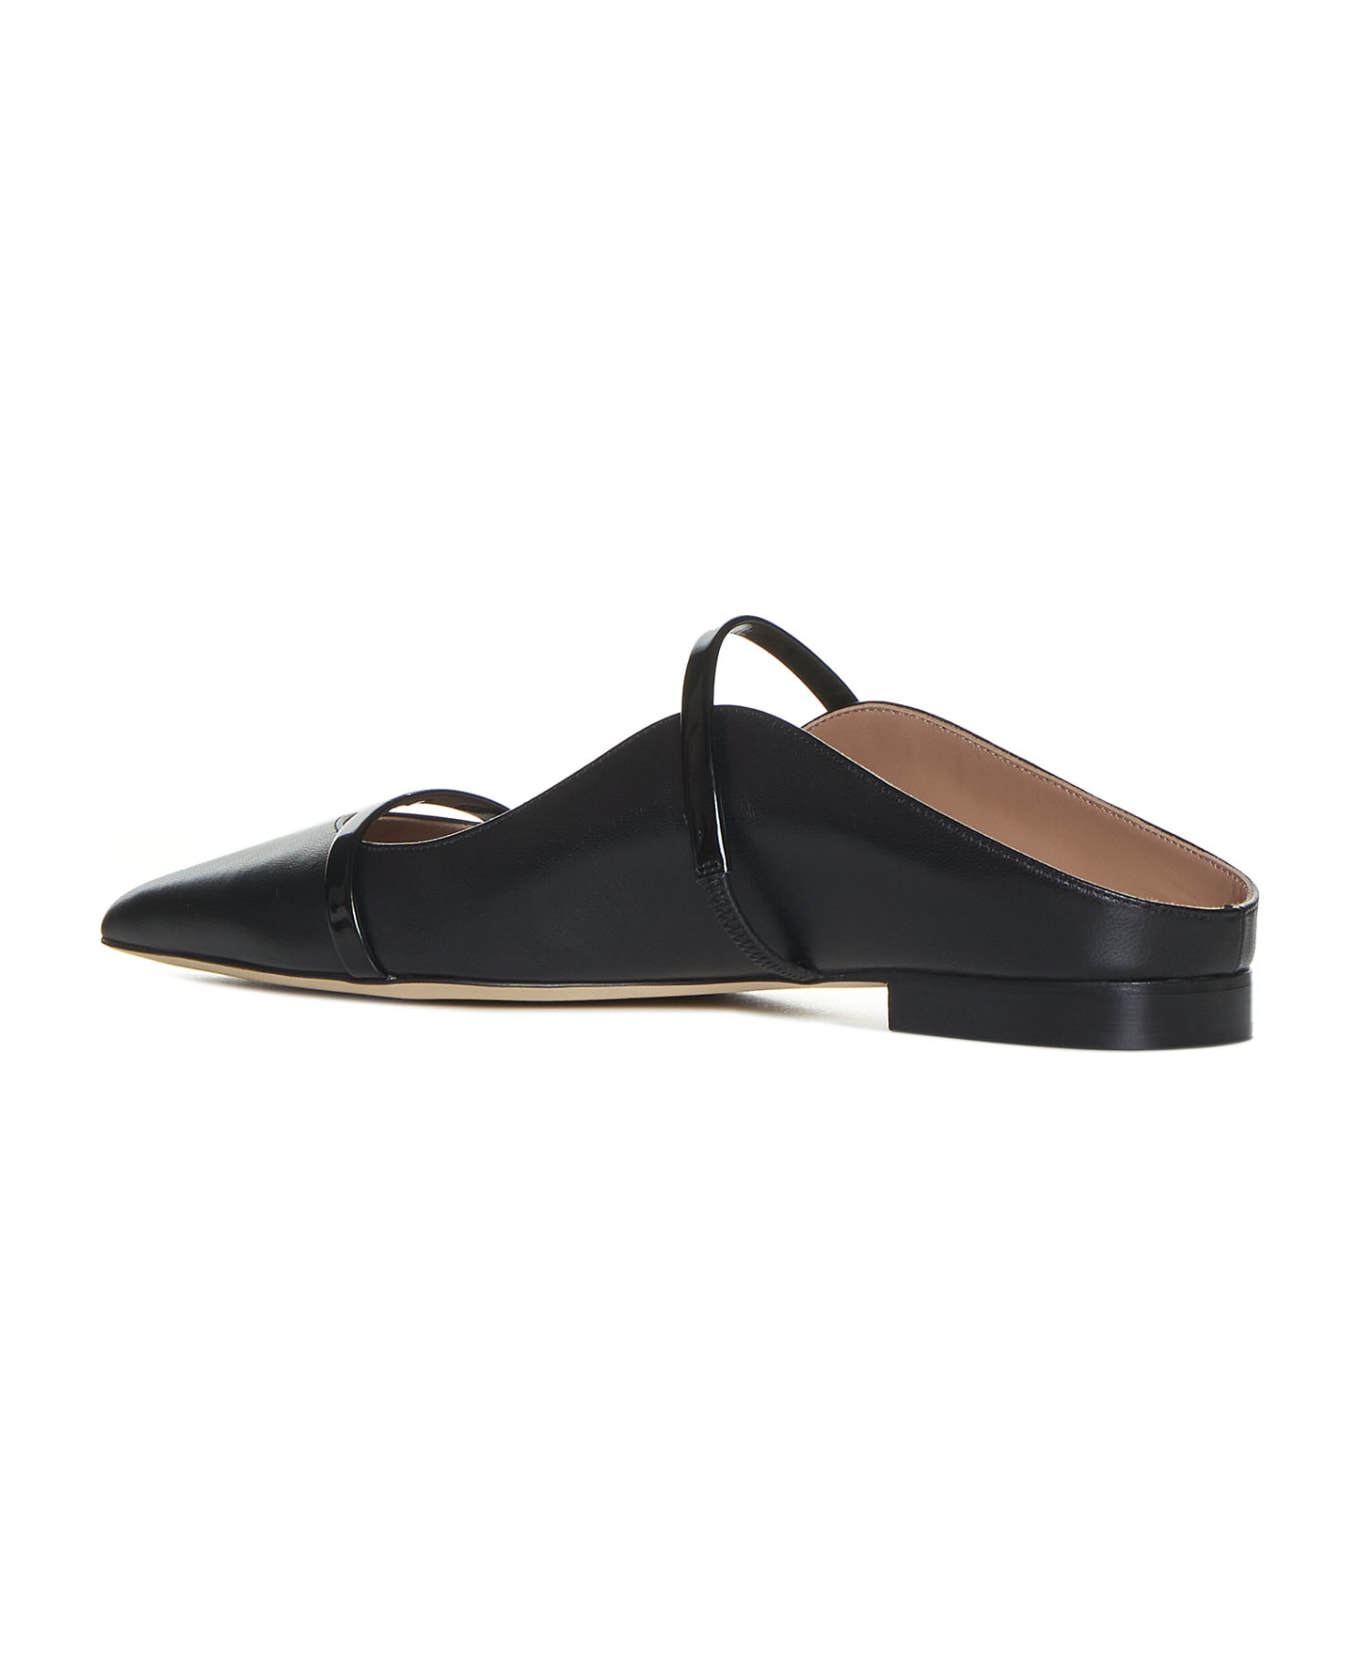 Malone Souliers Sandals - Black